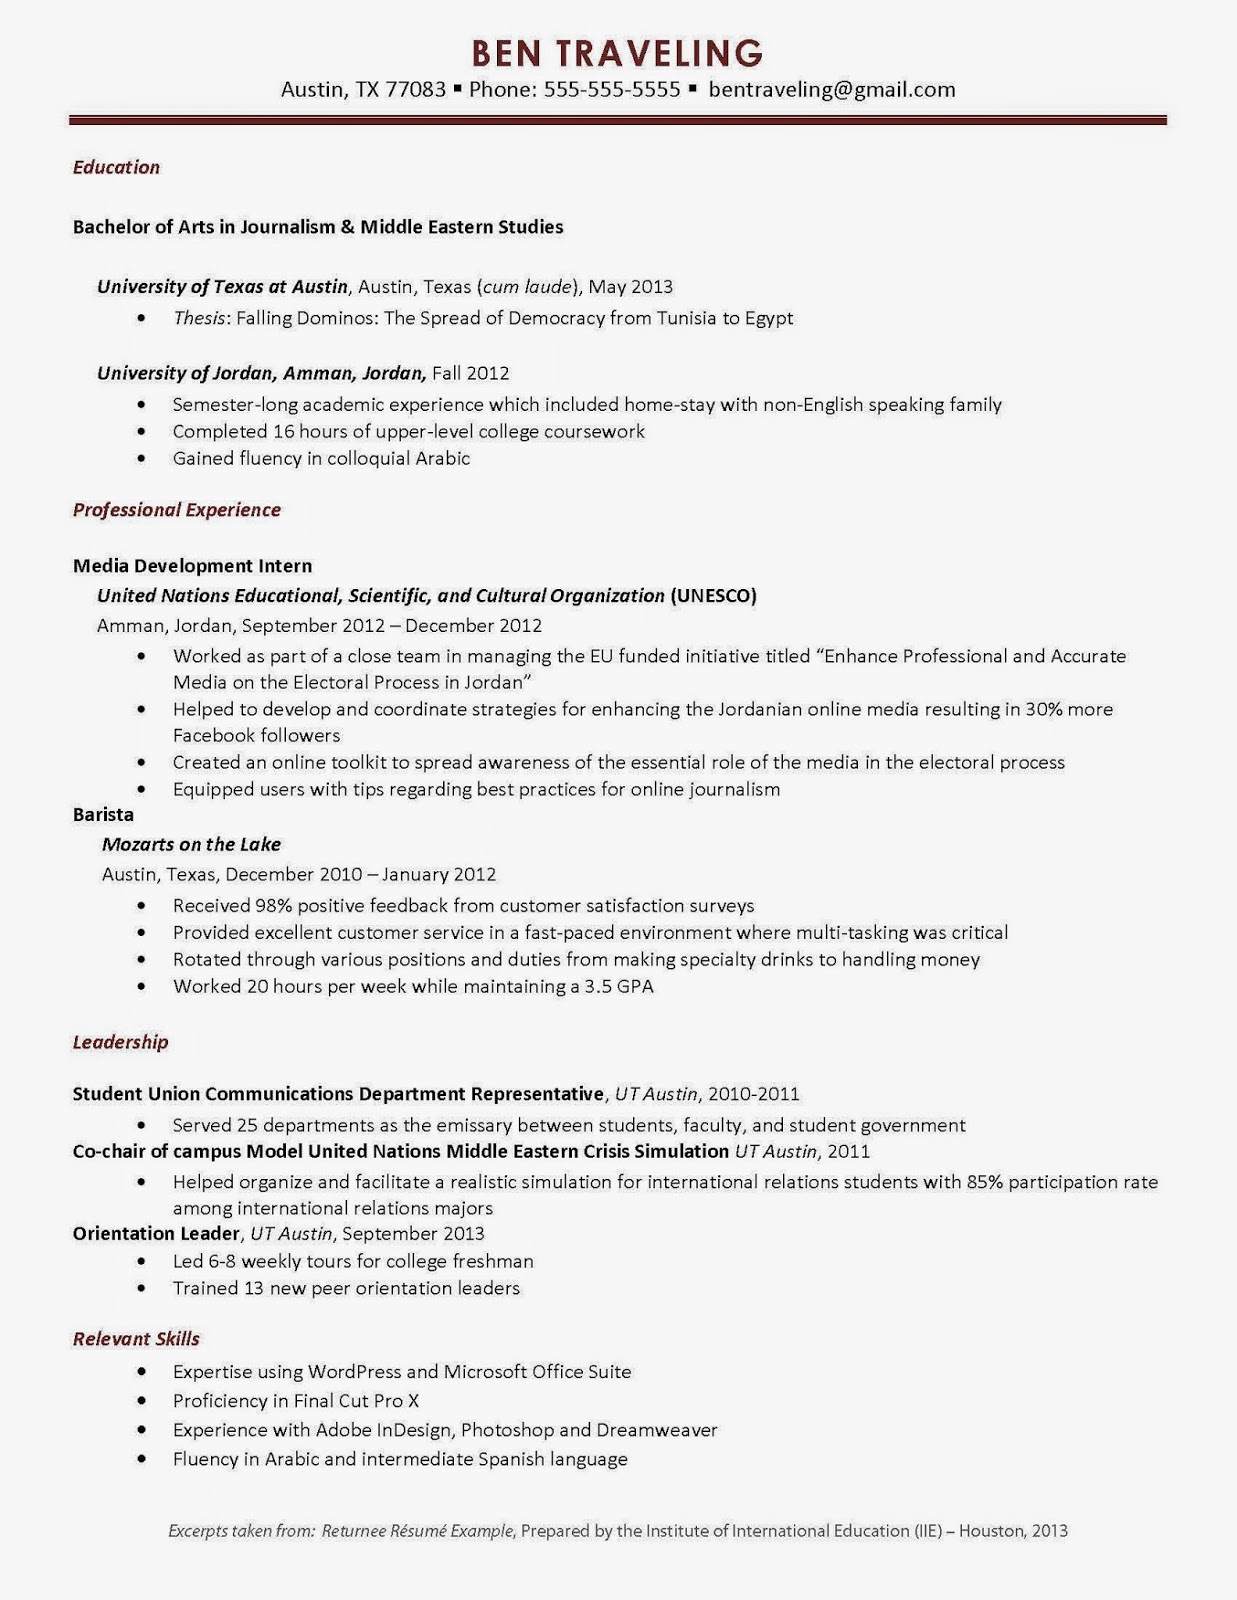 Resume samples for drafting and design